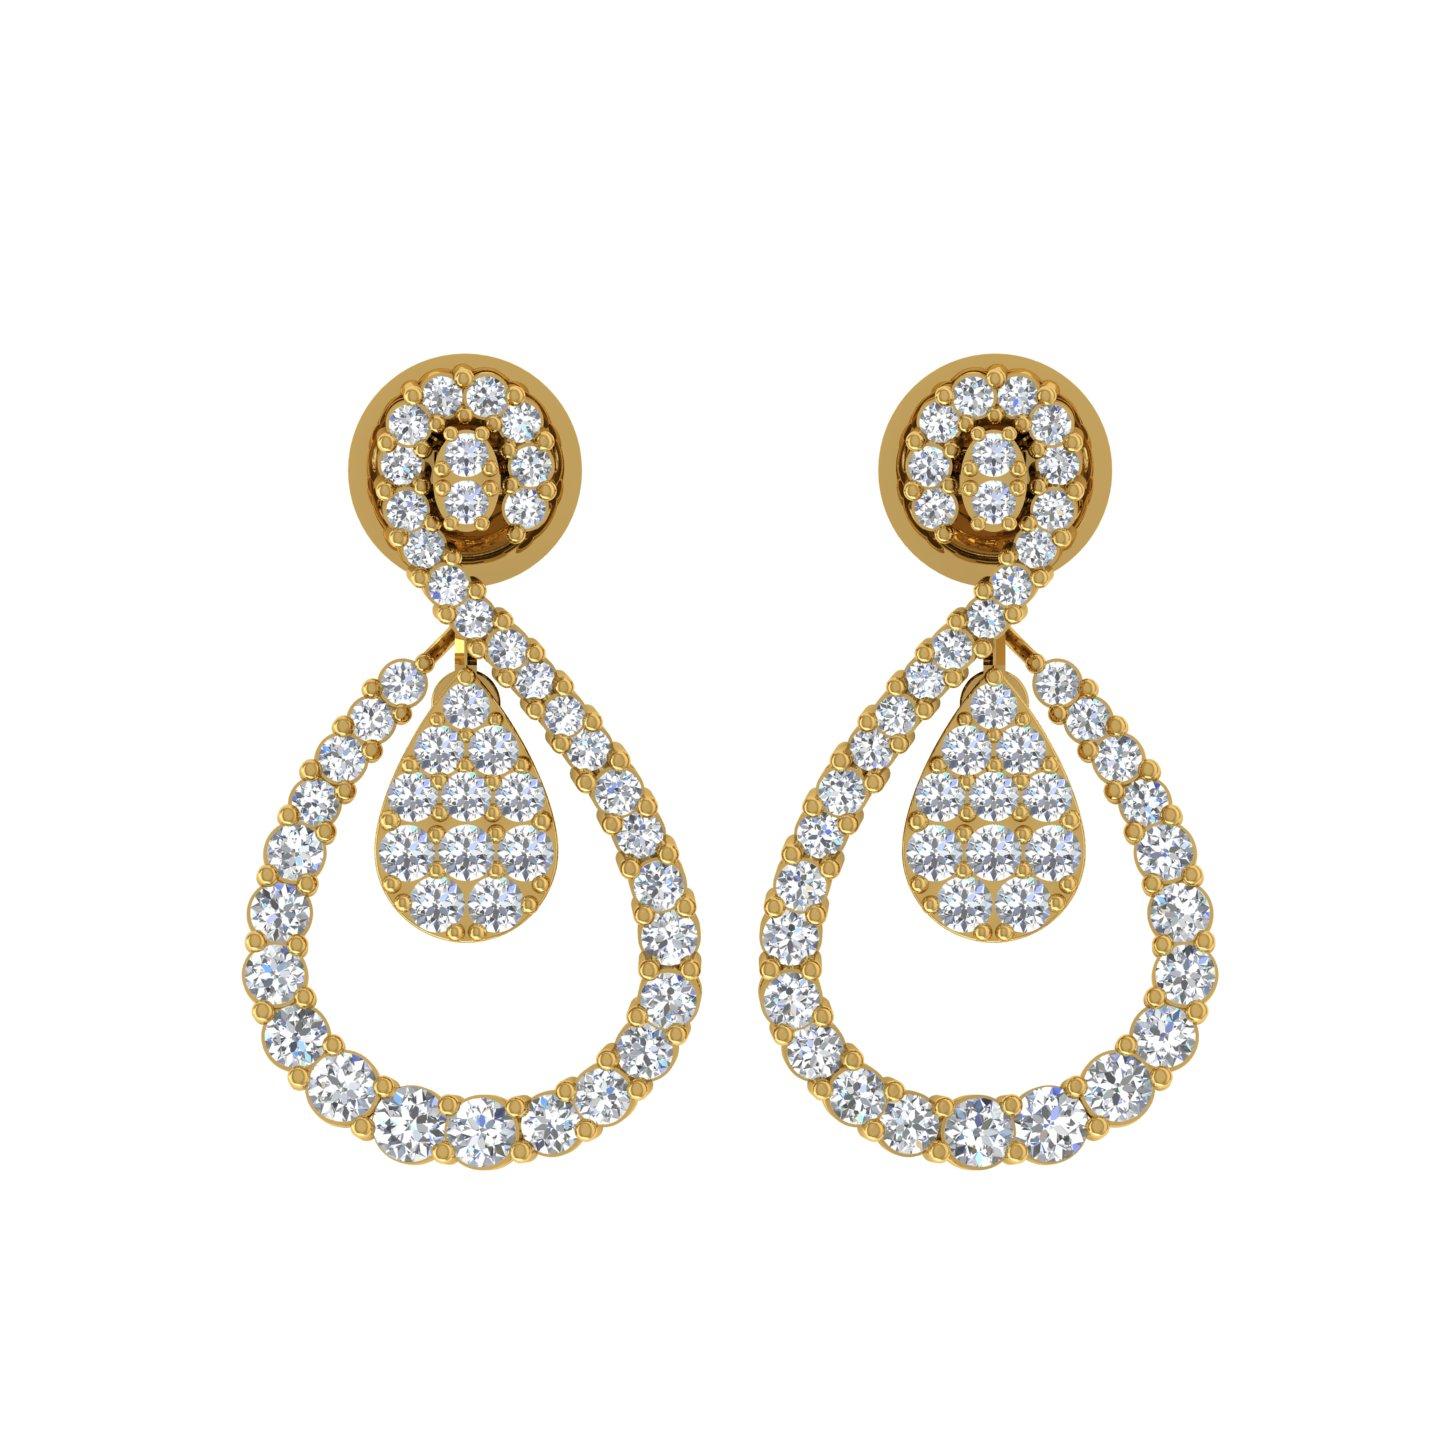 Item Code :- SEE-13070
Gross Wt. :- 5.23 gm
14k Solid Yellow Gold Wt. :- 4.88 gm
Natural Diamond Wt. :- 1.75 Ct. ( SI Clarity & HI Color )
Earrings Size :- 25 mm approx.

✦ Sizing
.....................
We can adjust most items to fit your sizing